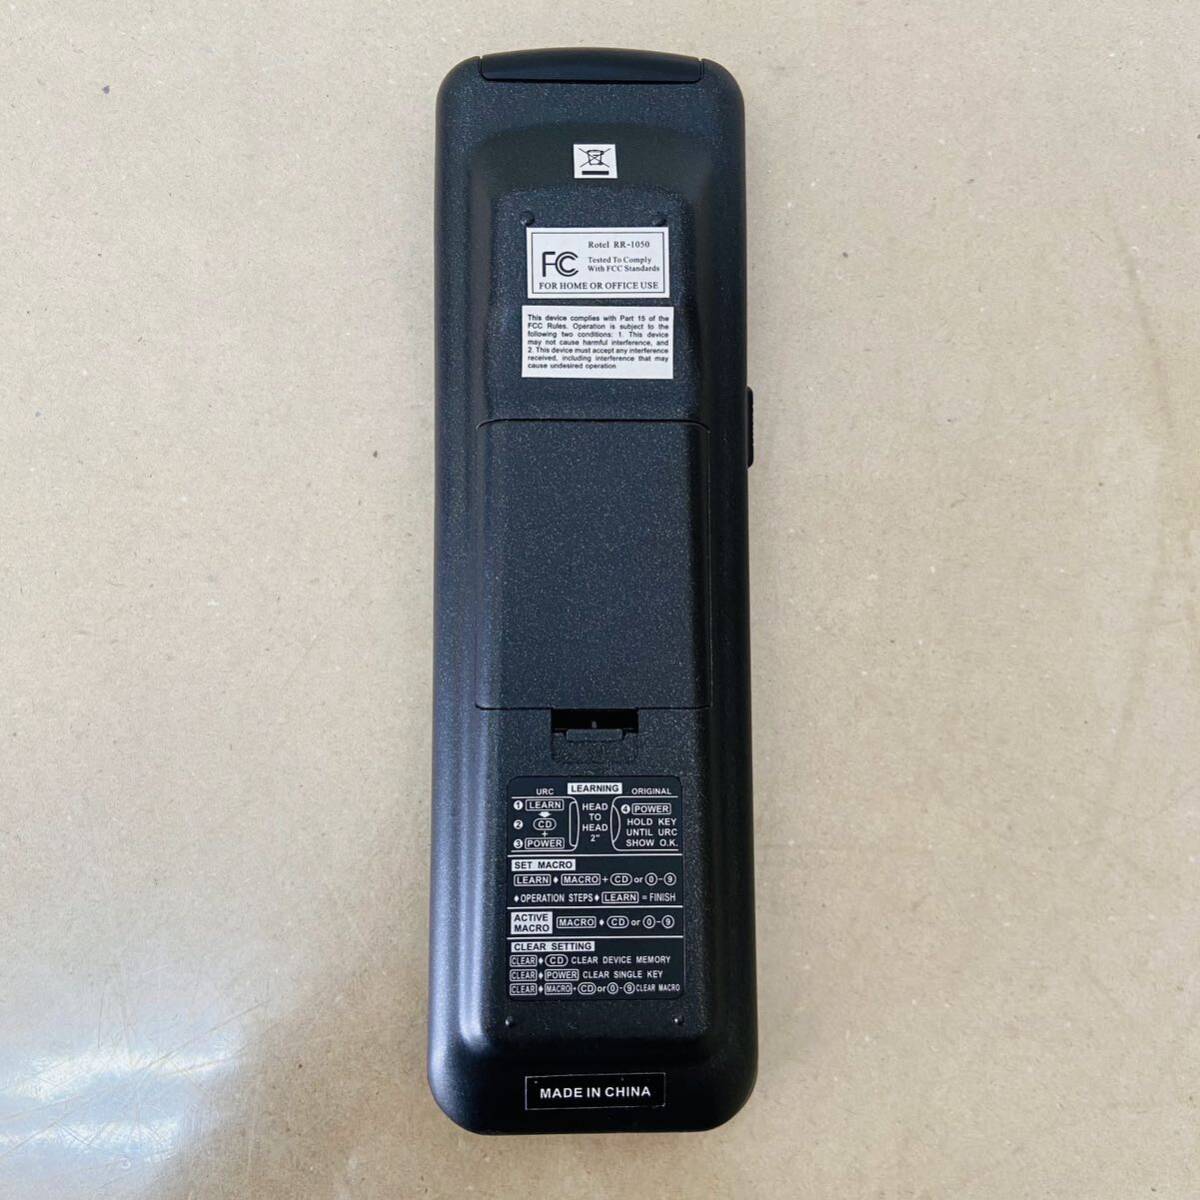 ROTEL RR-1050  Universal Learning Remote Control i18071 コンパクト発送 動作品 の画像3